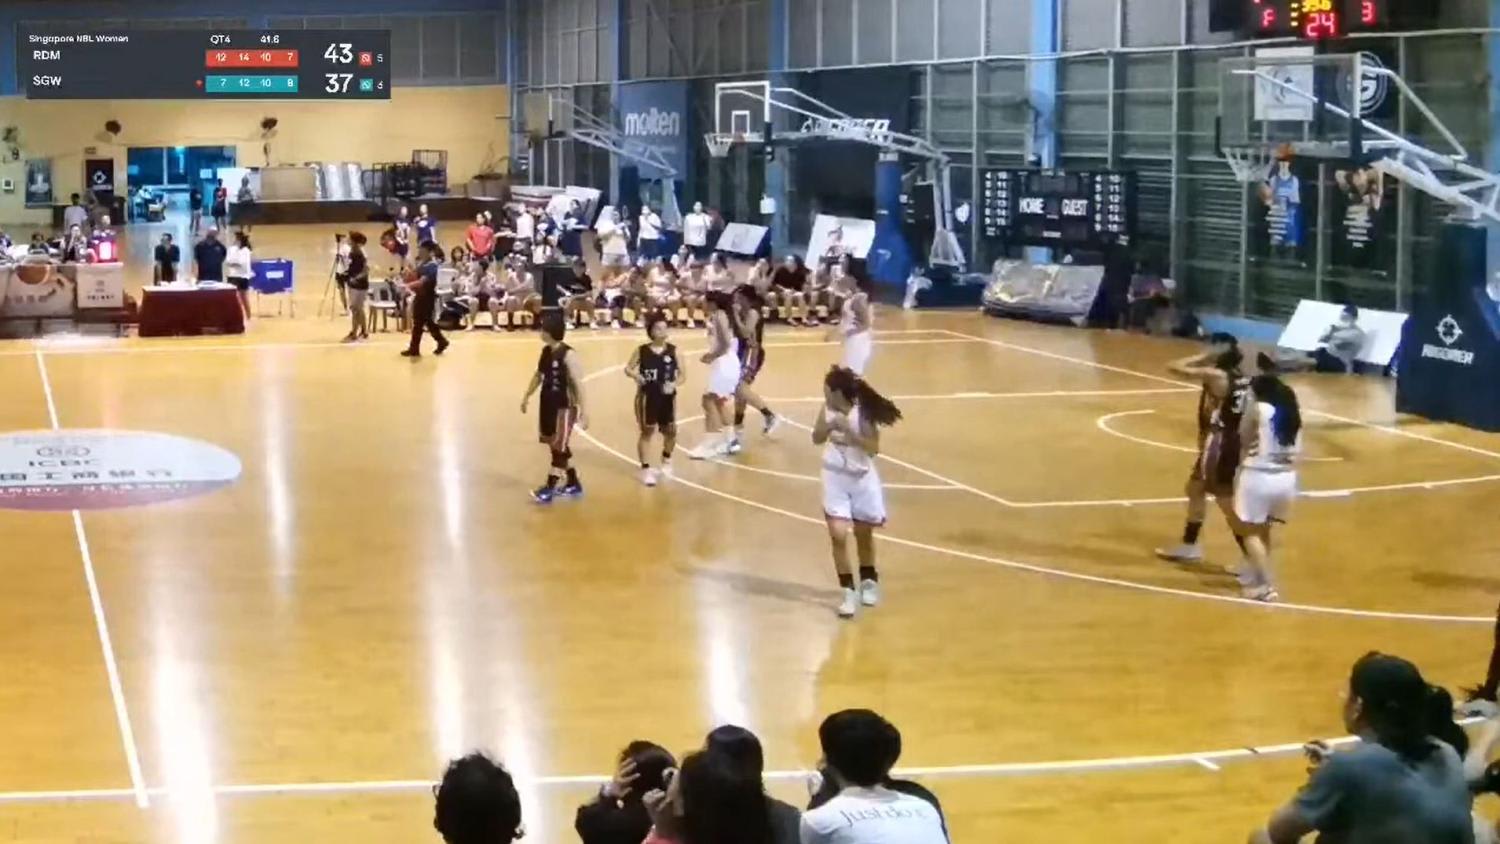 Players react after what appears to be a ceiling light crashes to the ground in front of a scorer's table during a Pennant Cup match at the Singapore Basketball Centre on Nov 12, 2022. 